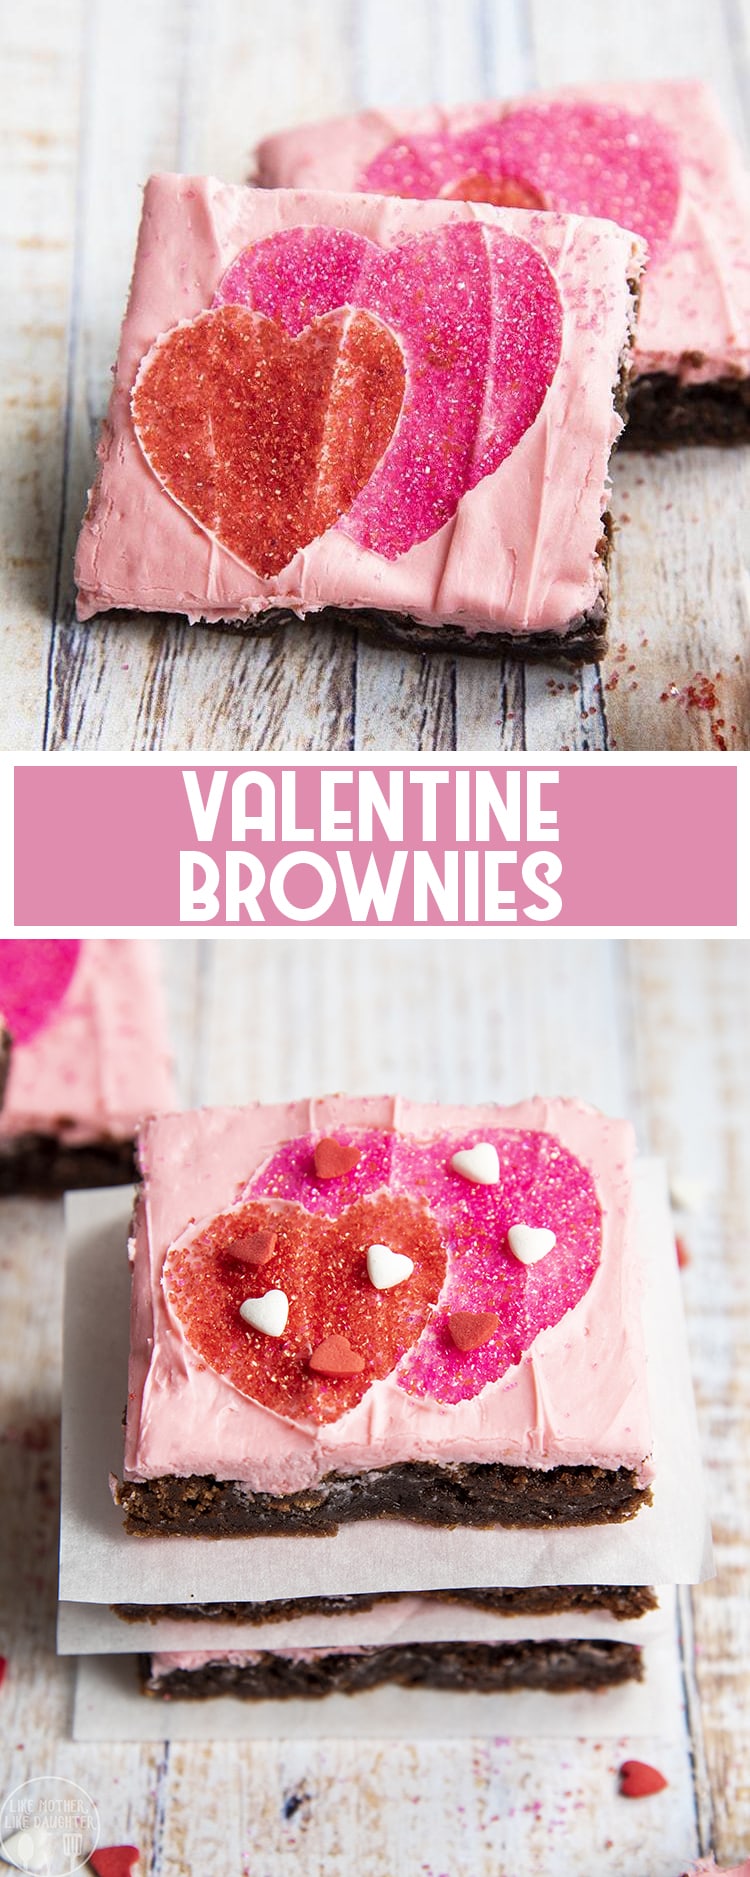 Valentine Brownies are a super easy and fun brownie topped with pink frosting and a heart pattern made with sprinkles!